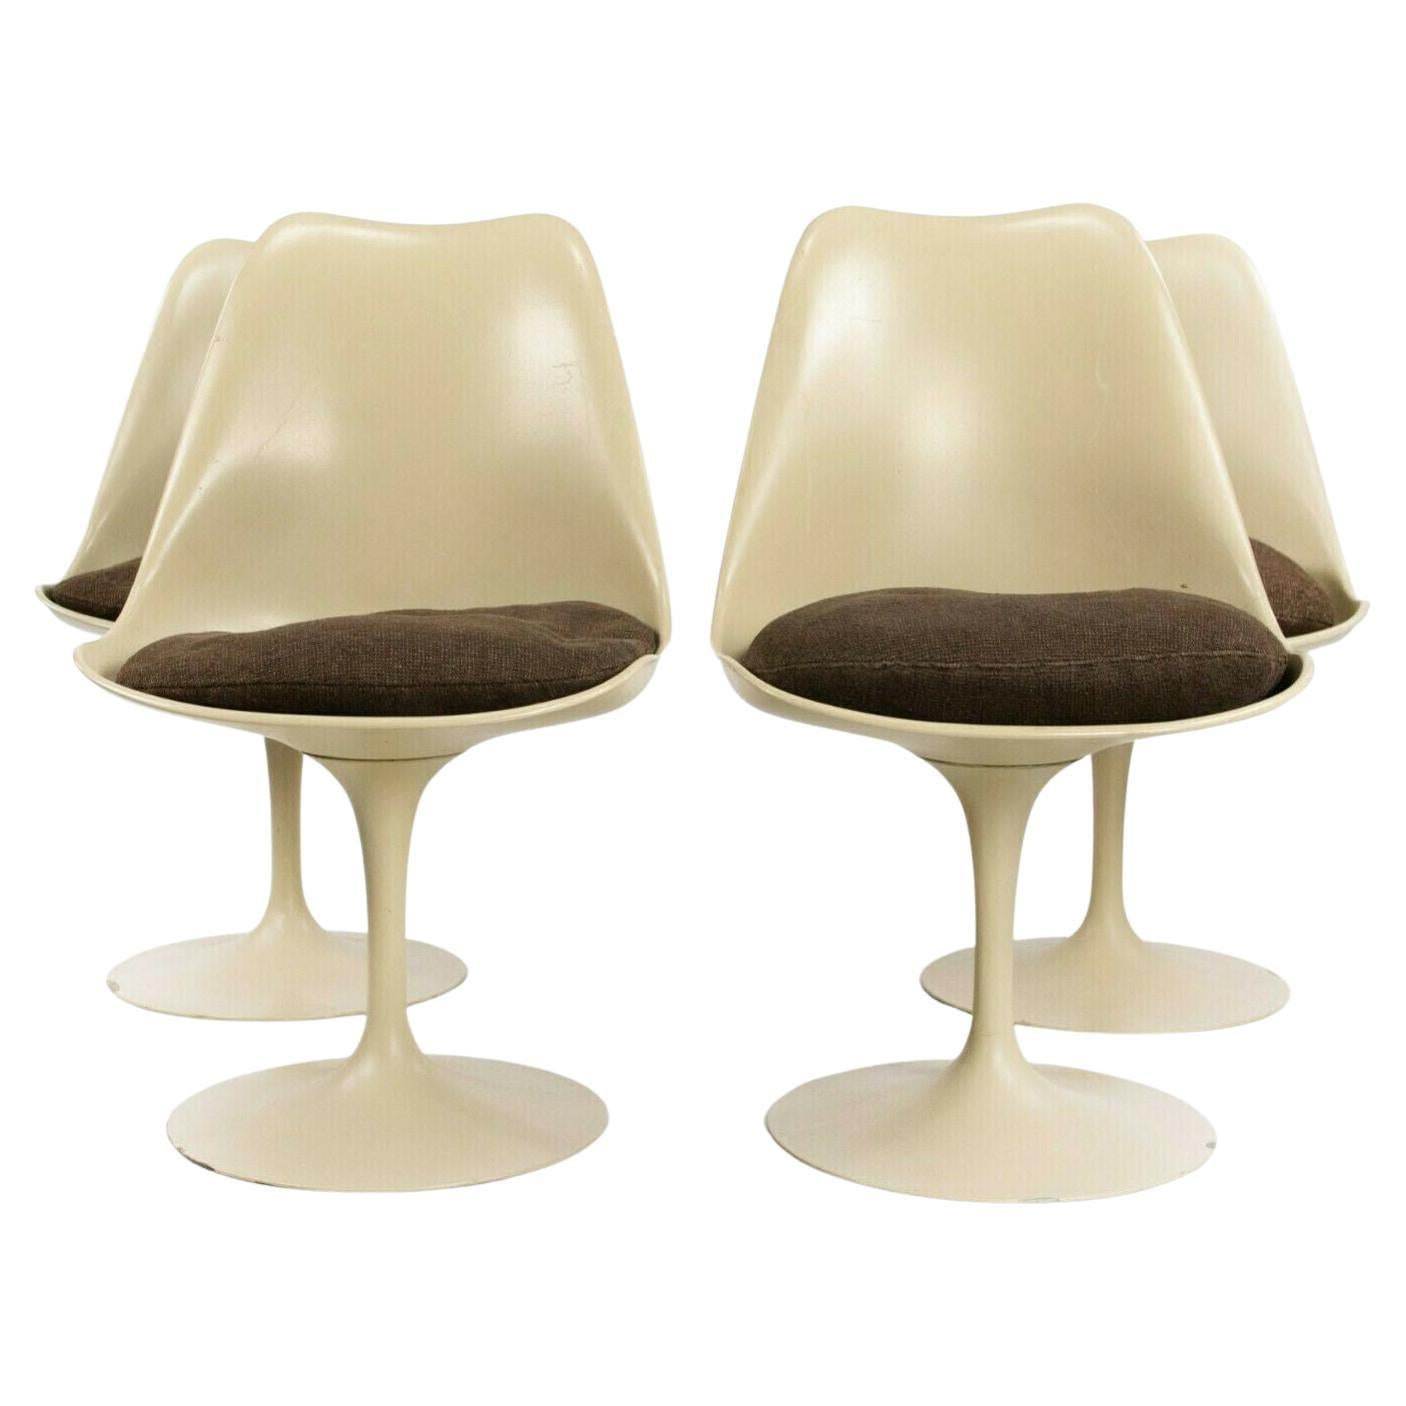 1960s Set of 4 Eero Saarinen for Knoll Armless Tulip Side Chairs in Brown Fabric For Sale